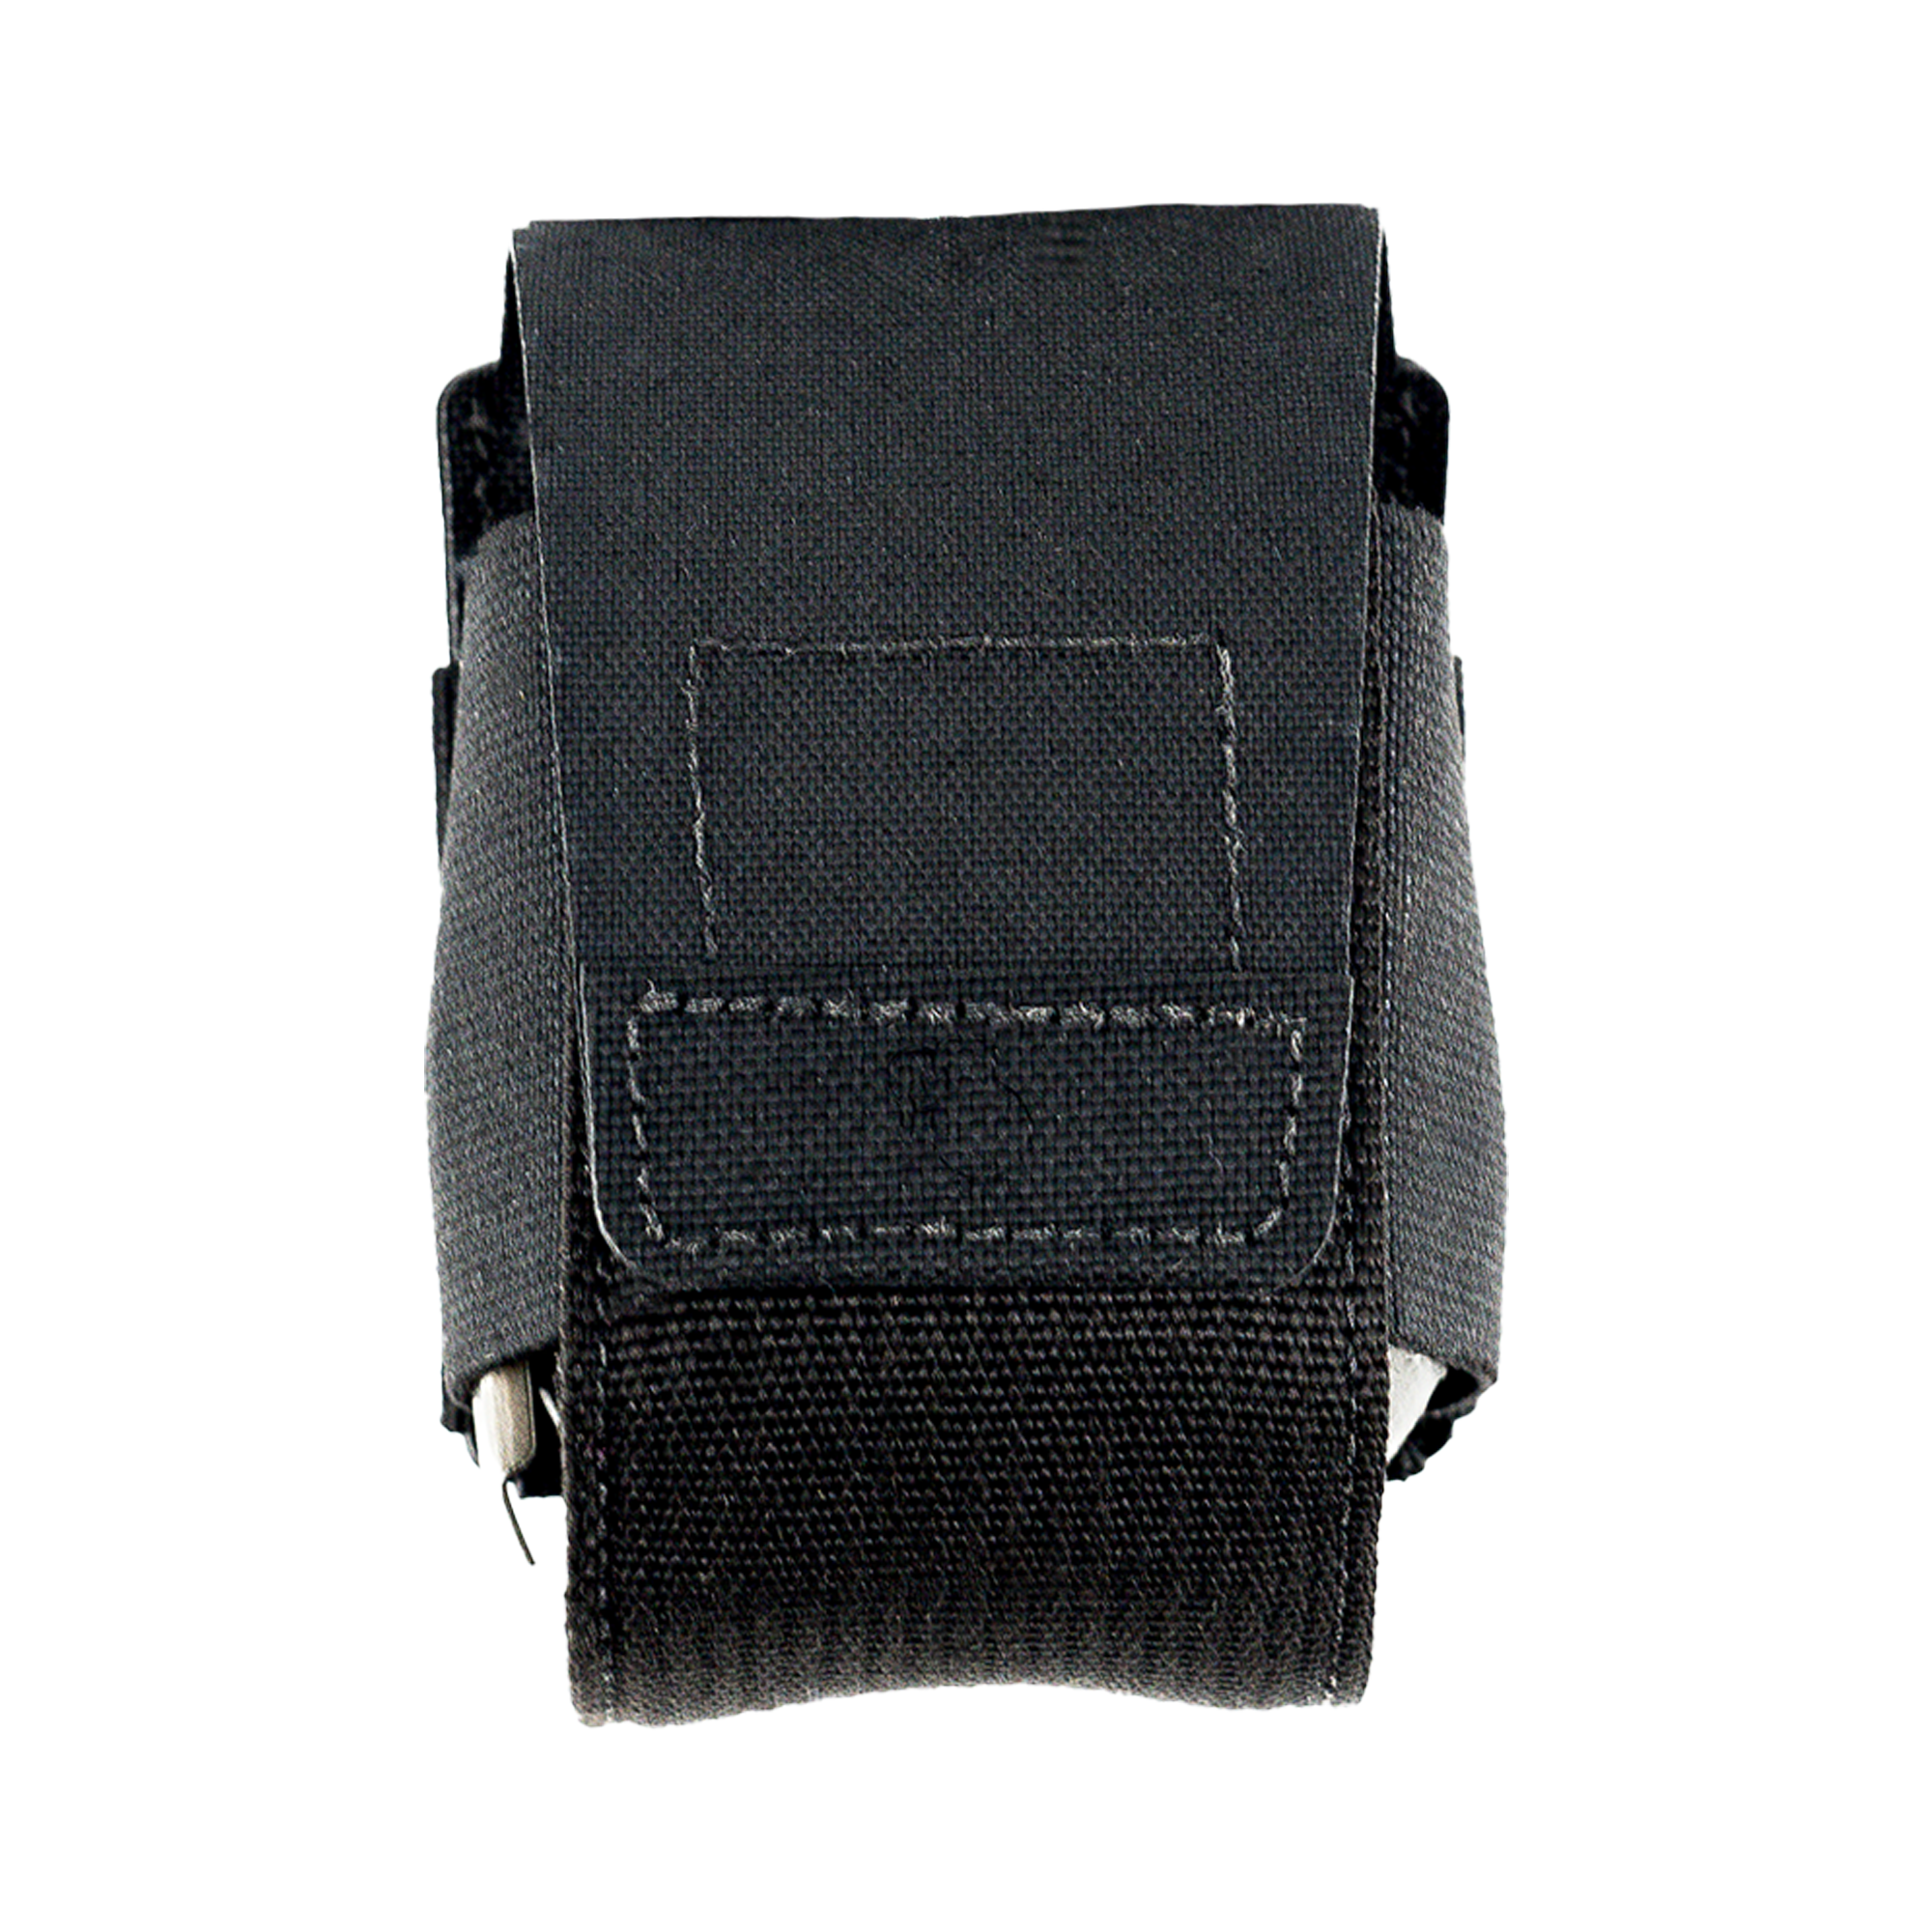 Frag Pouch Black, One Size